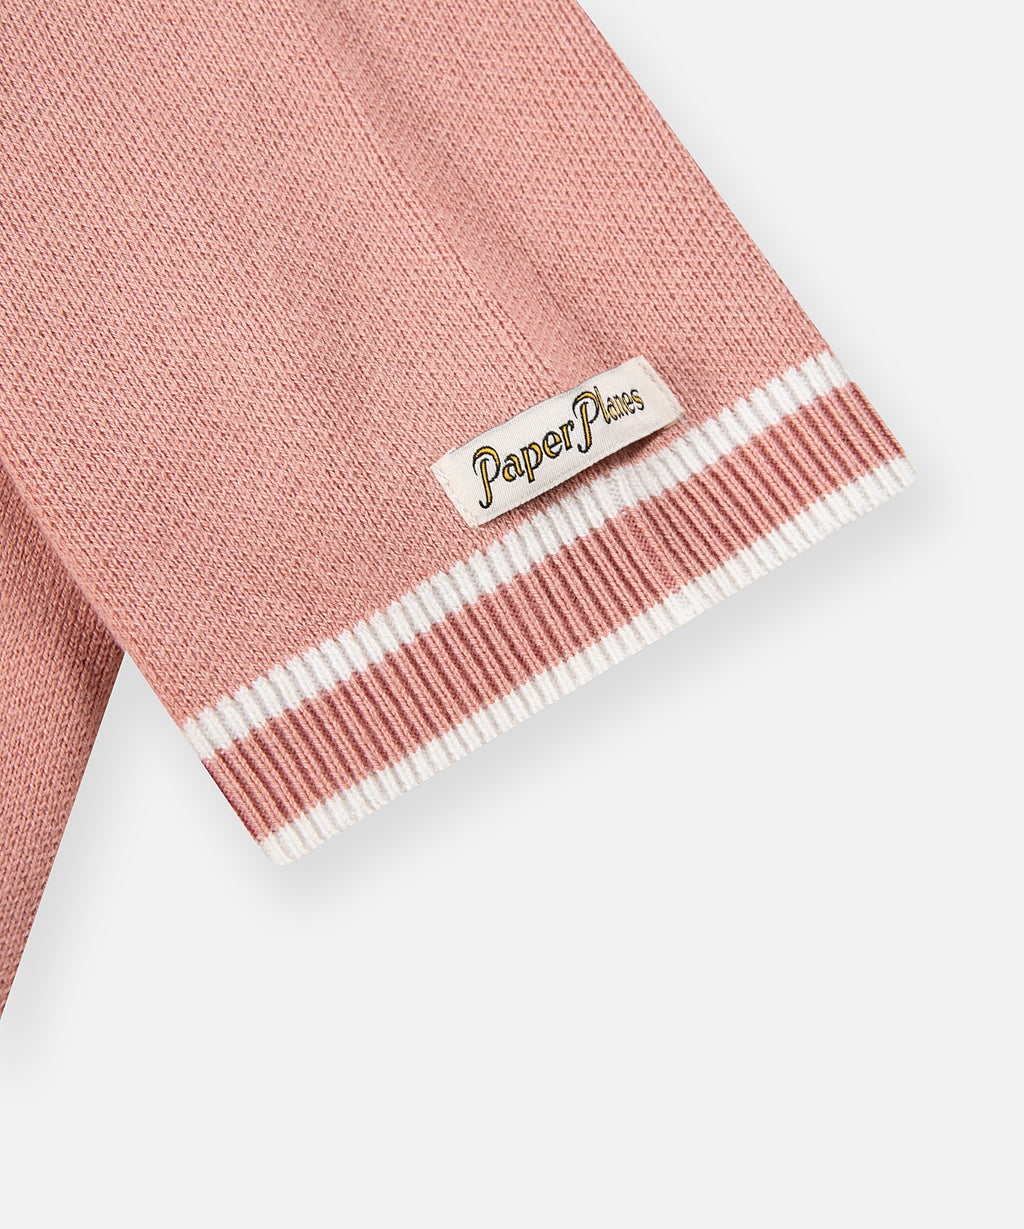  Paper Planes woven label above sleeve cuff on Paper Planes Sweater Bowling Shirt, color Pale Mauve.